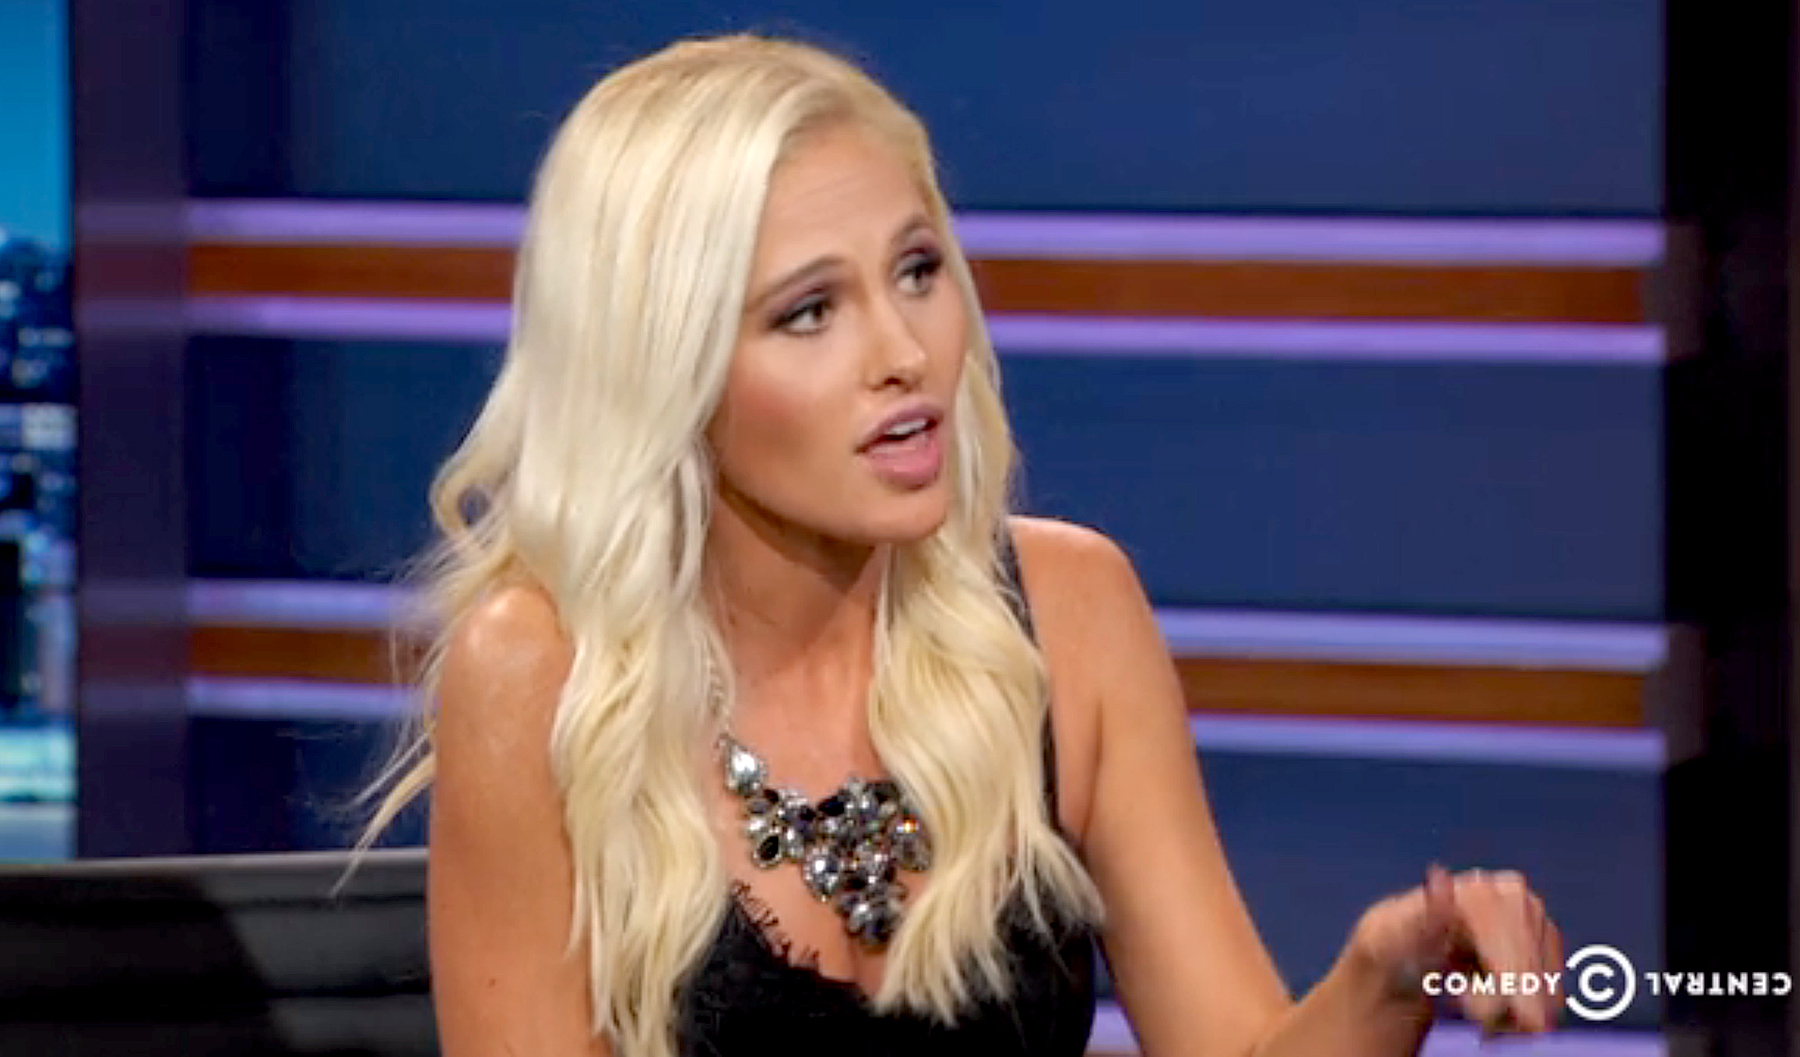 Trevor Noah Grills Tomi Lahren About Racism in Viral Interview